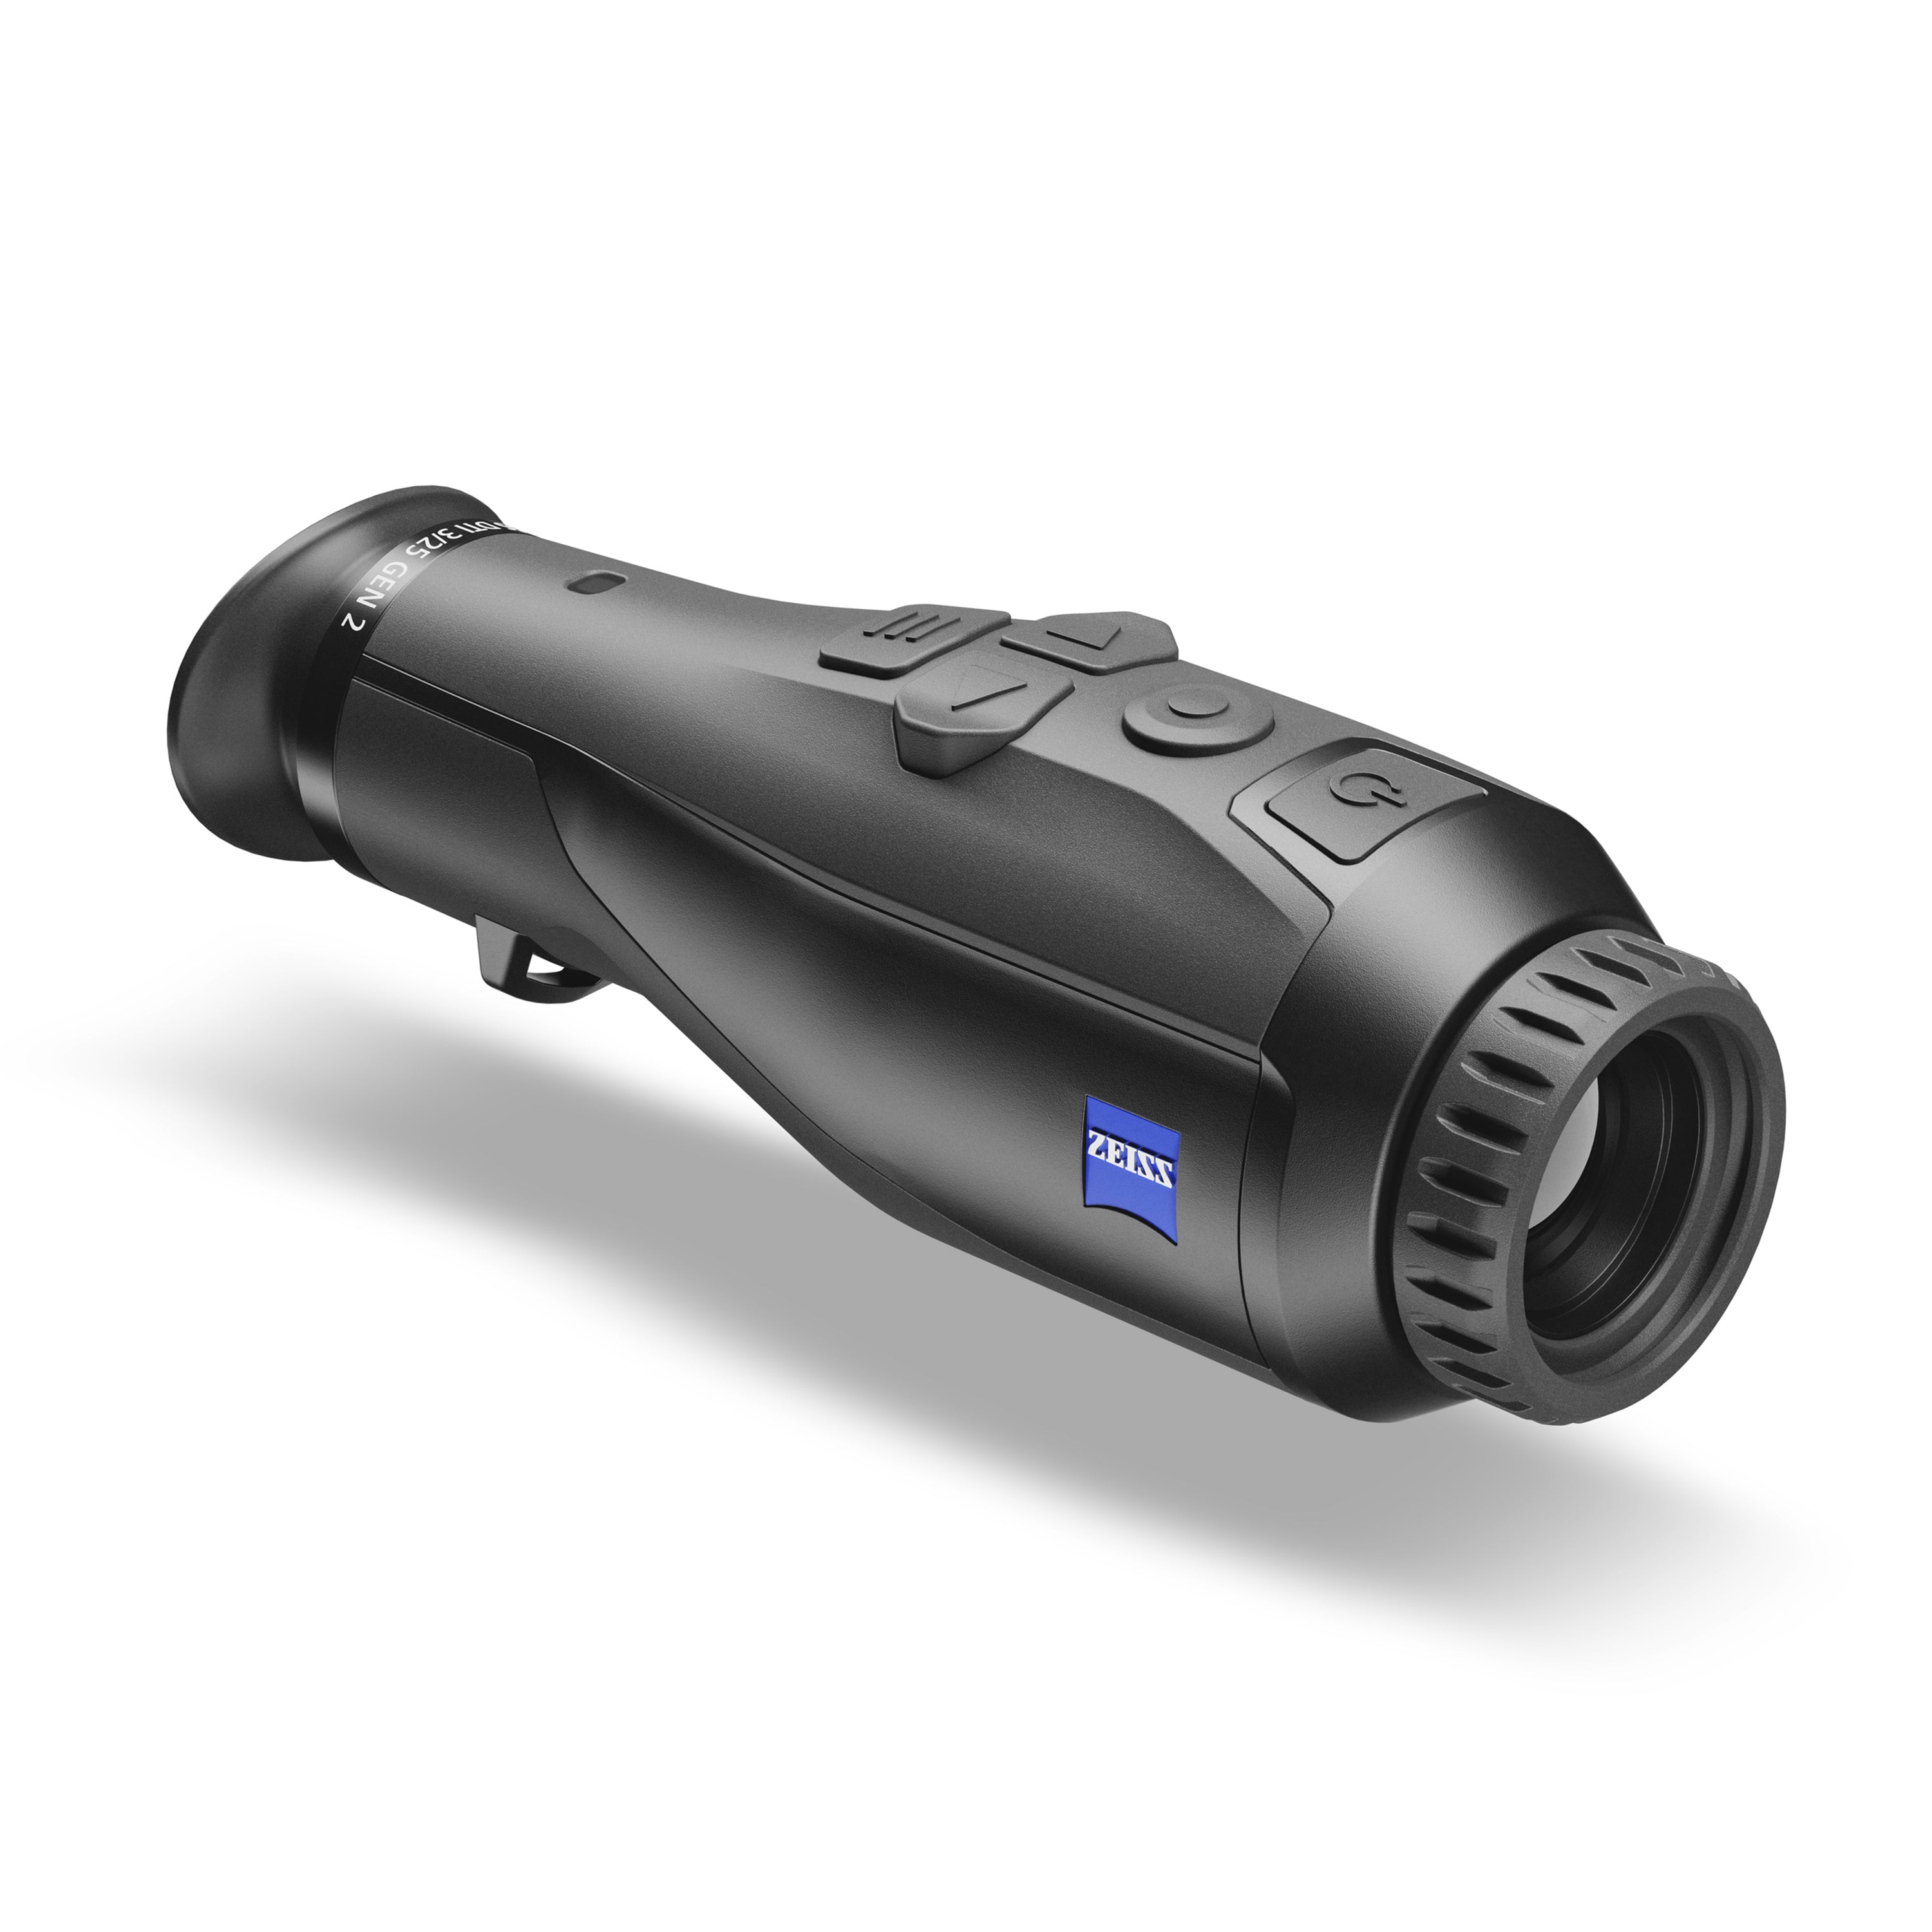 Zeiss DTI 3 Gen 2 Thermal Imaging Camera High-Resolution Monocular for Hunting and Wildlife Observation